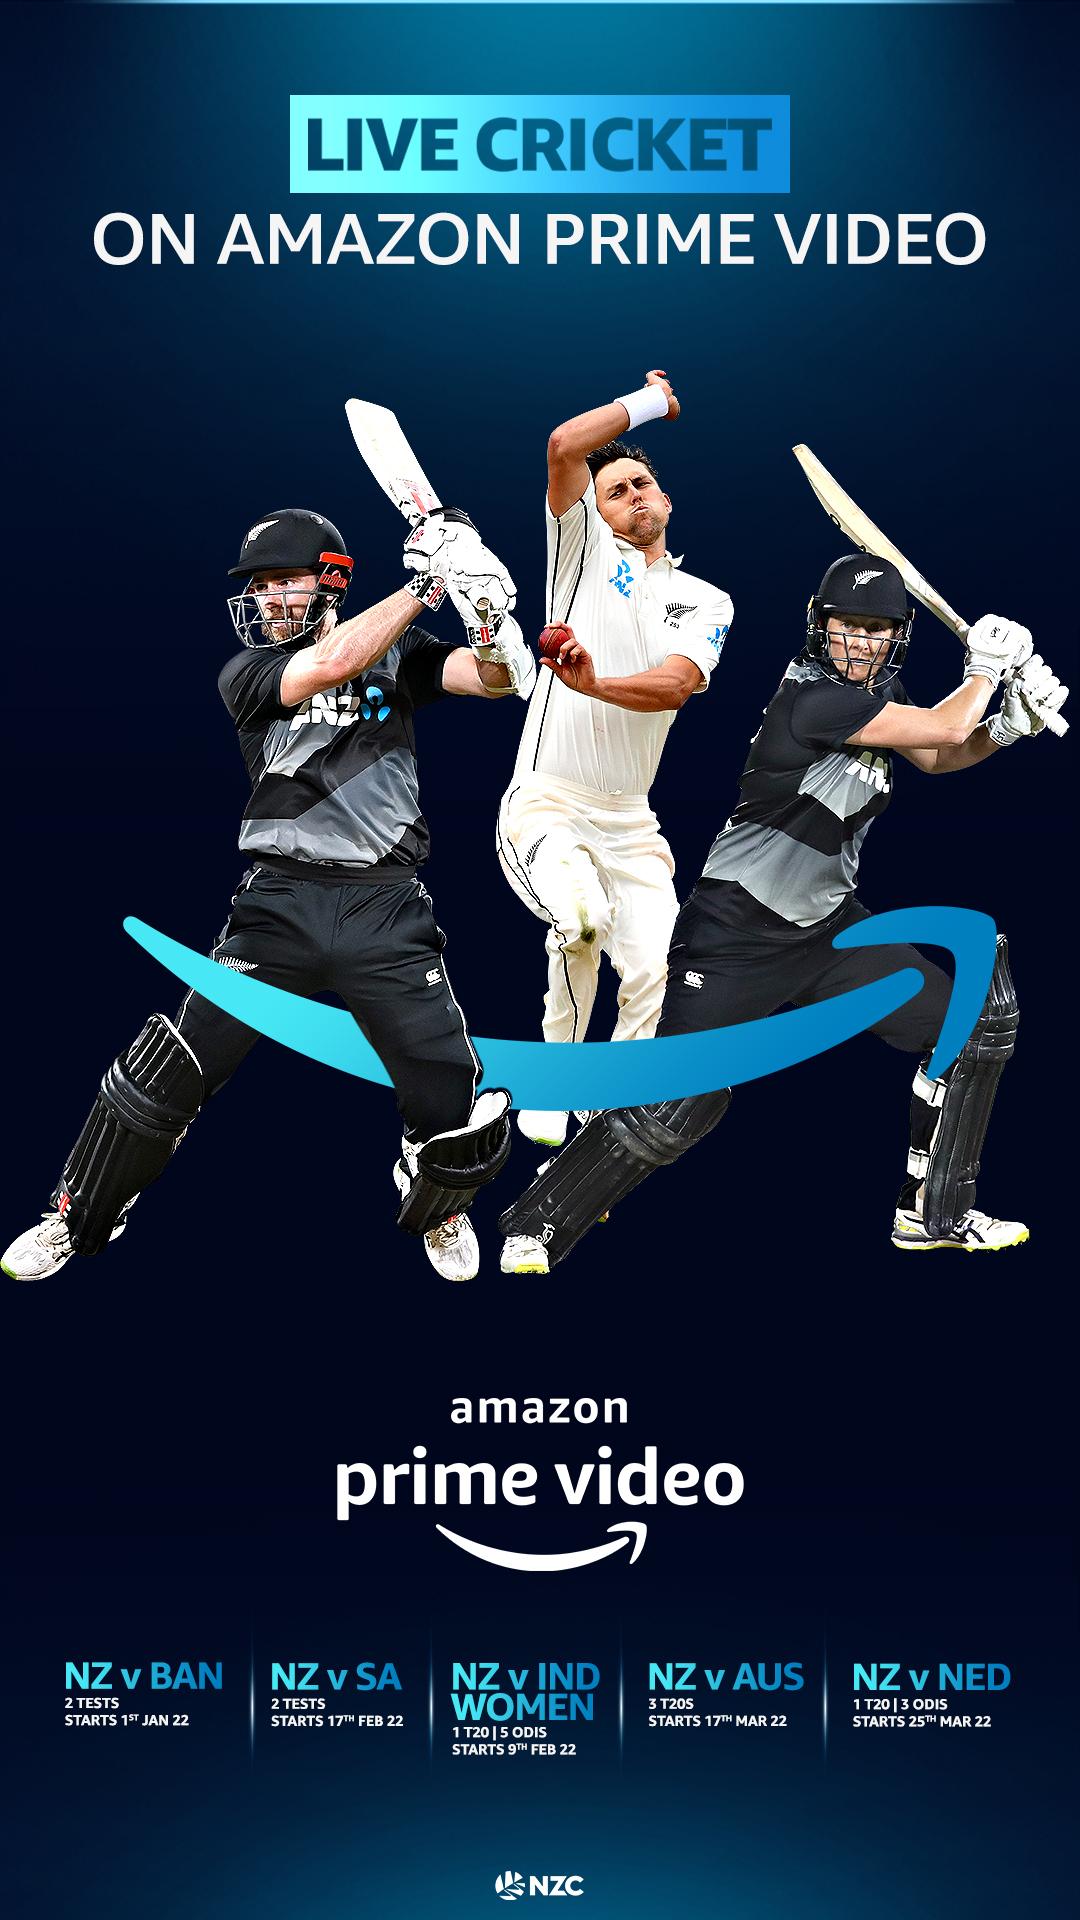 Amazon Prime Video Debuts Live Cricket Streaming Starting With New Zealand vs Bangladesh From January 1, 2022 